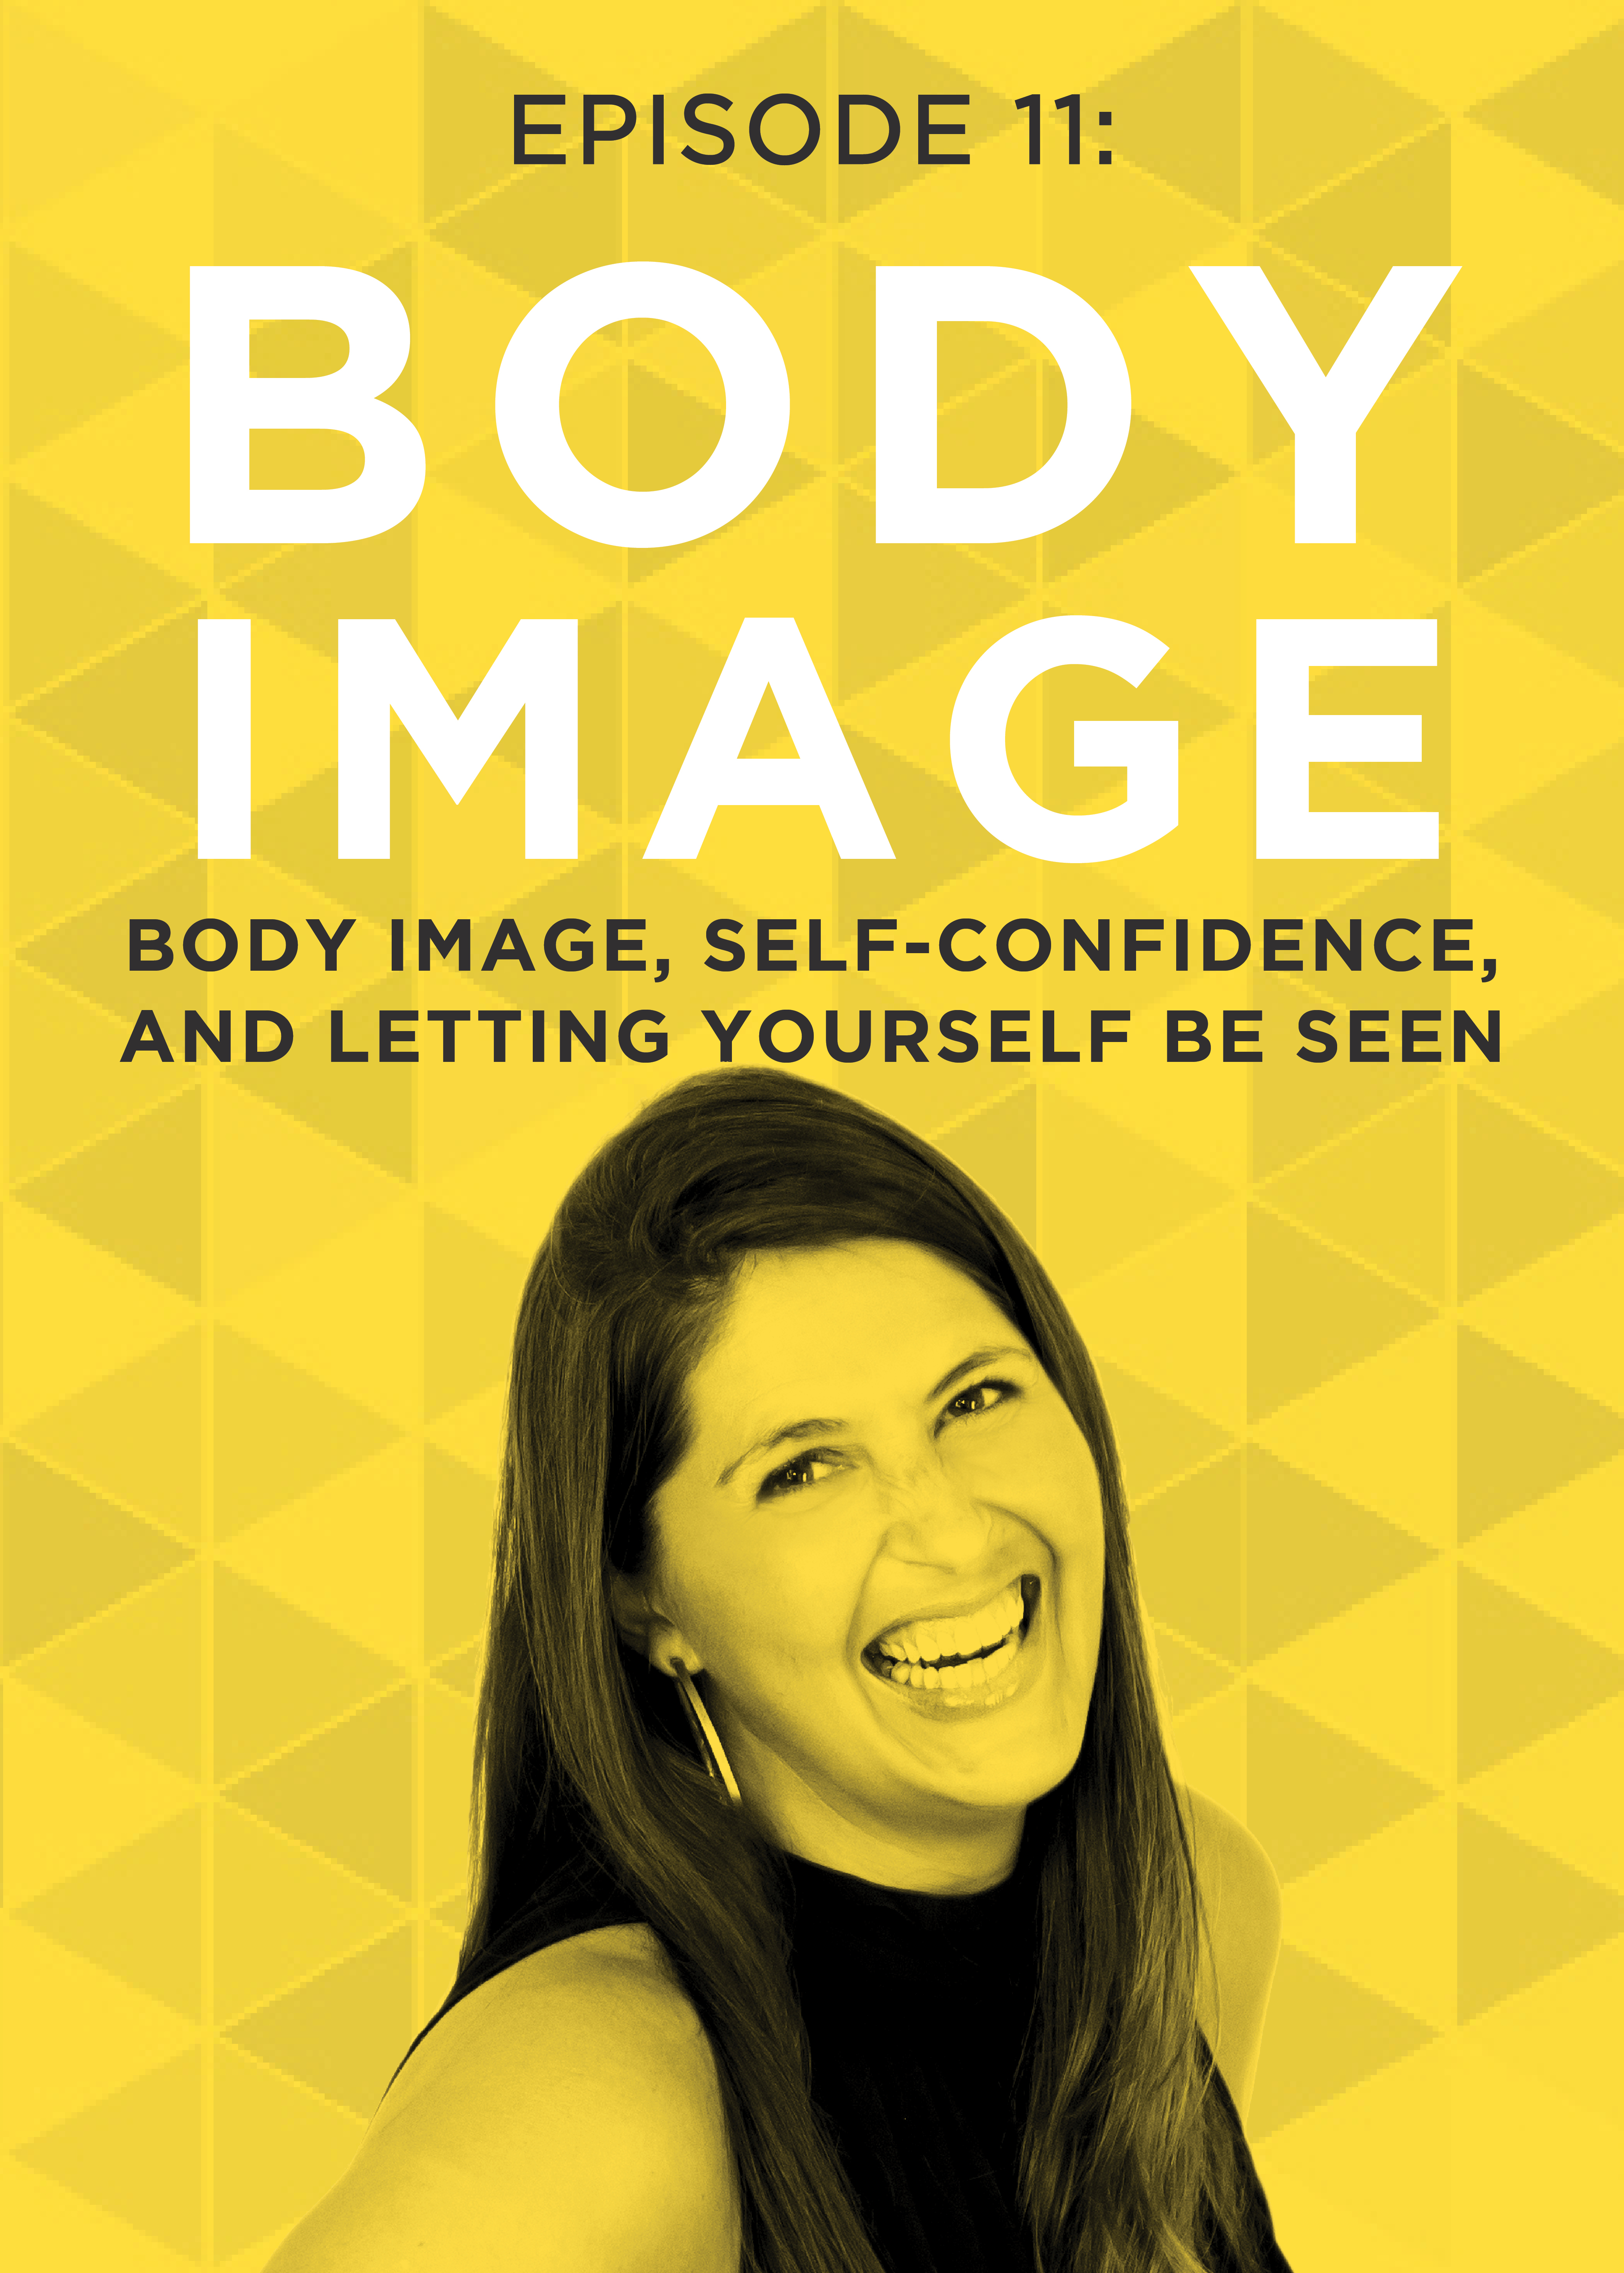 EP 11: Body Image, Self-Confidence, and Letting Yourself Be Seen